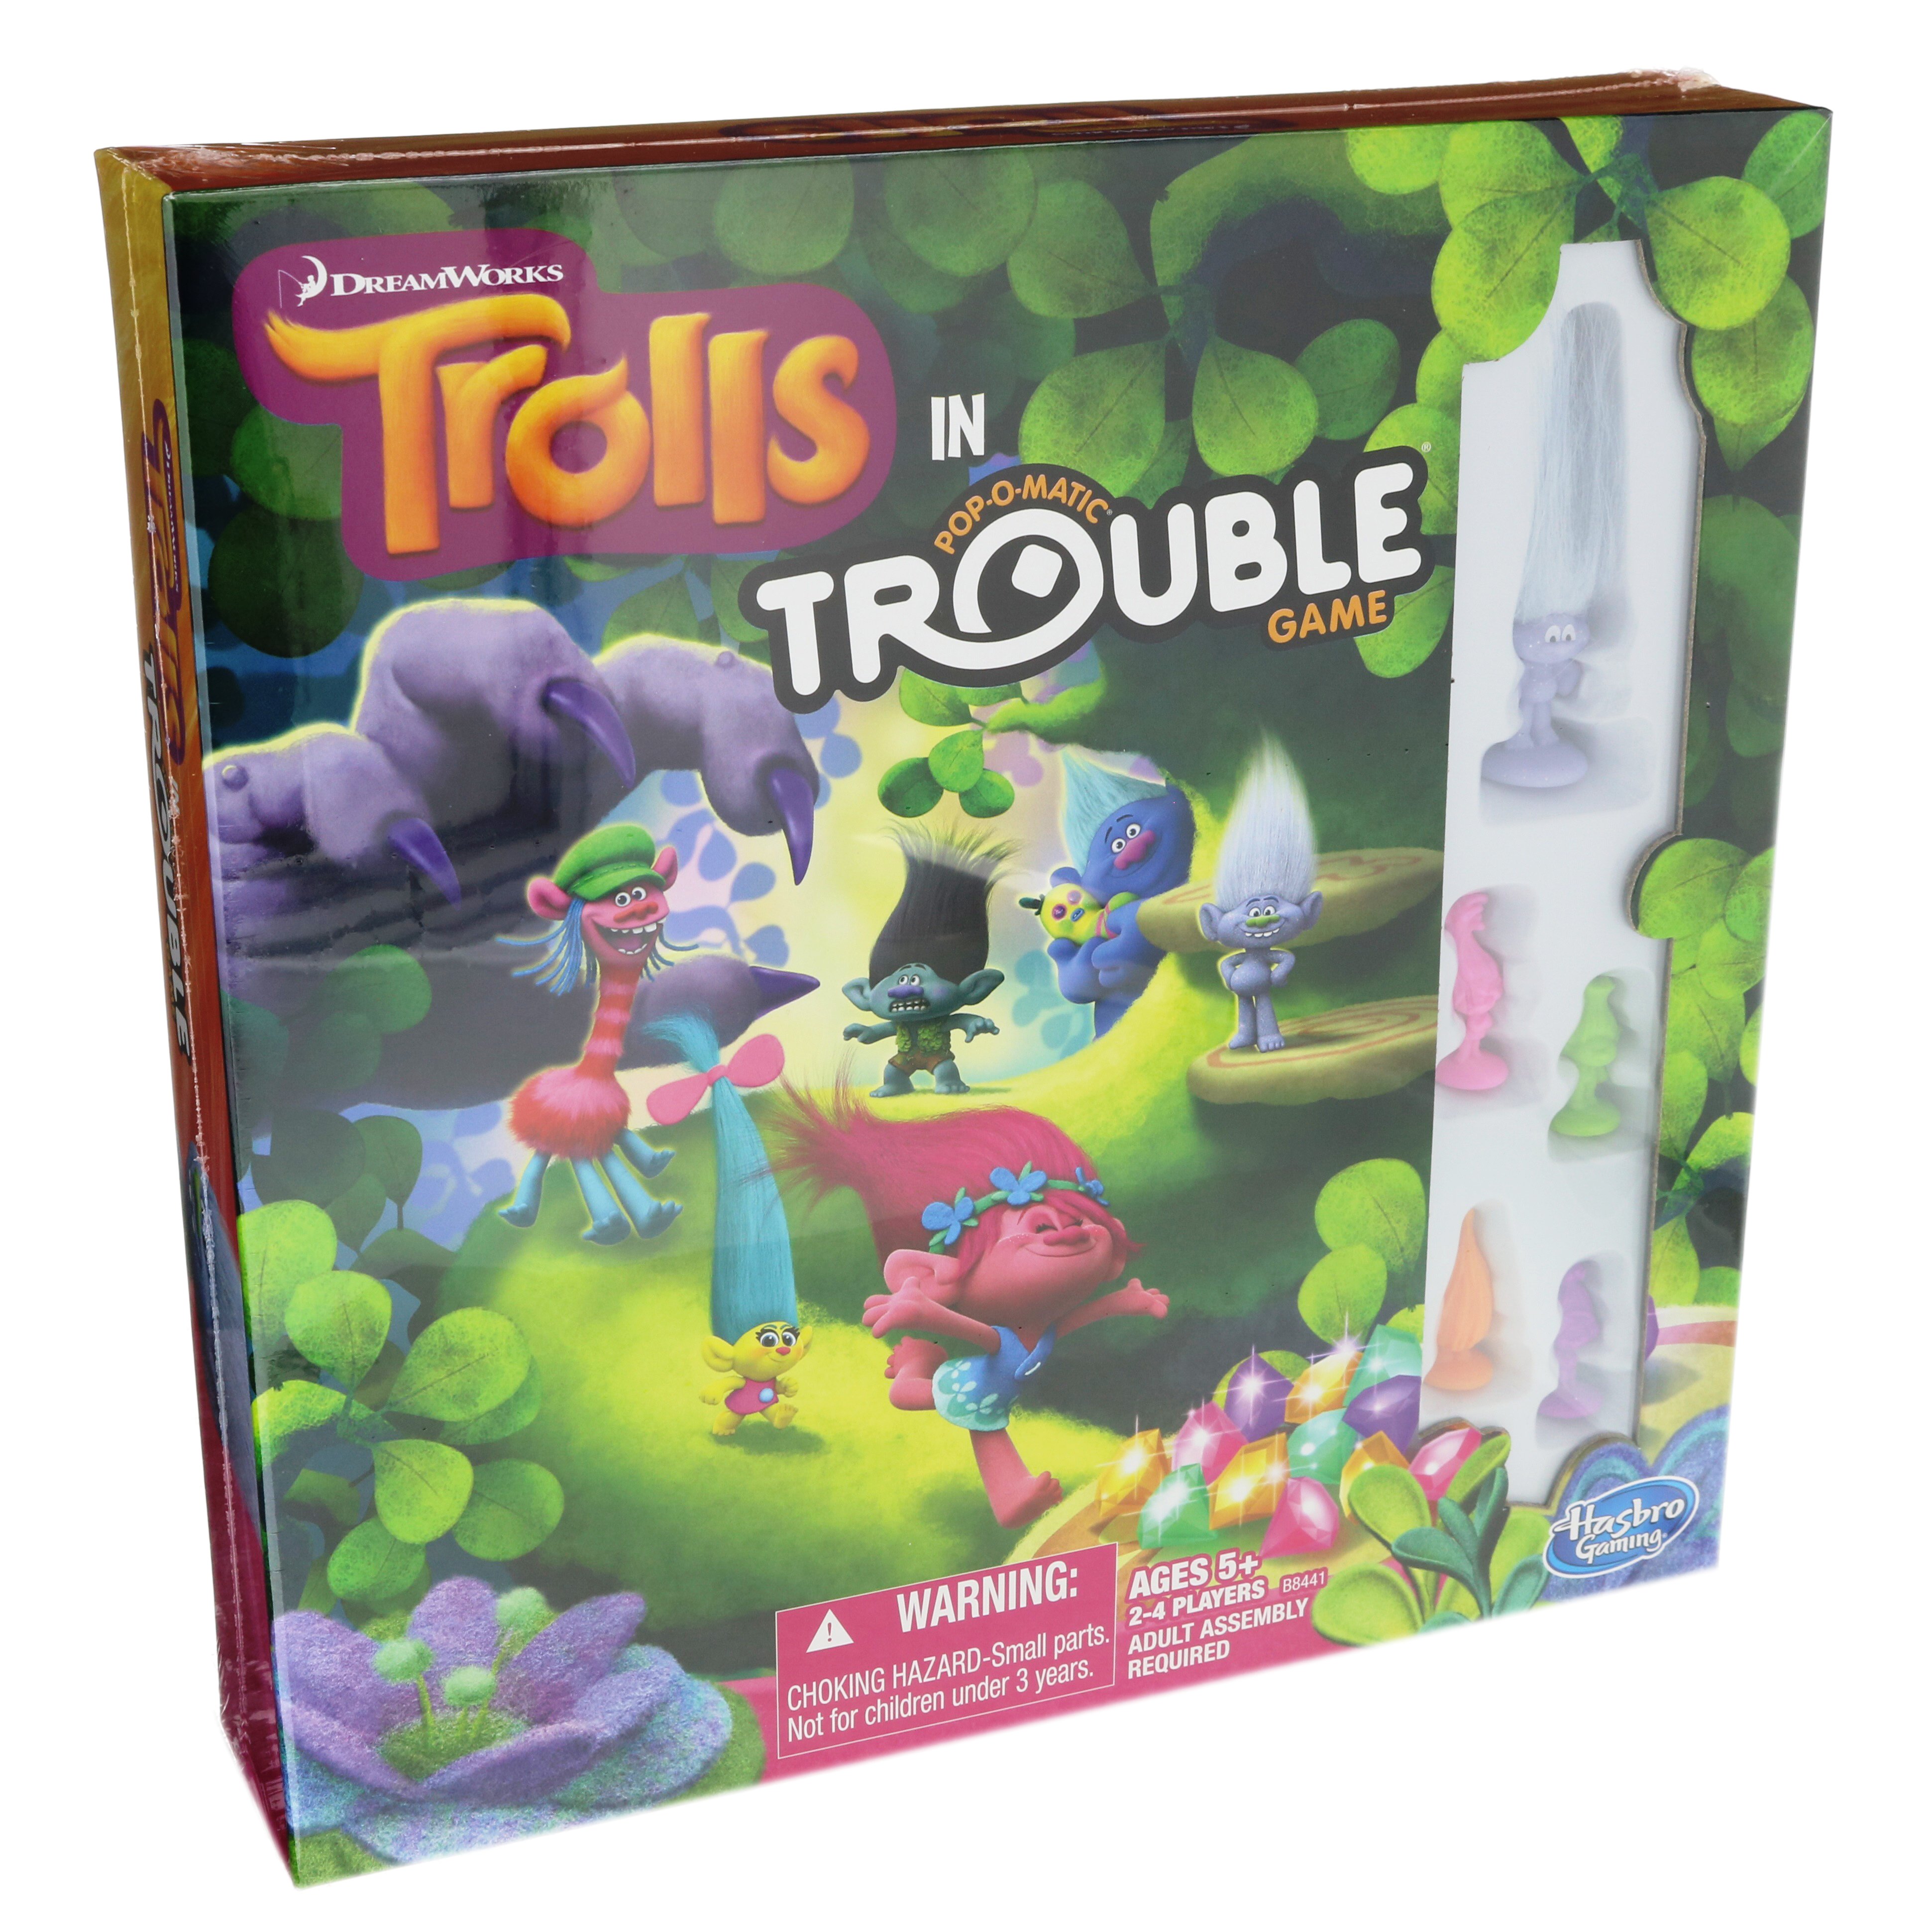 Hasbro Trouble Board Game, Board Game for 2 to 4 Players, for Kids